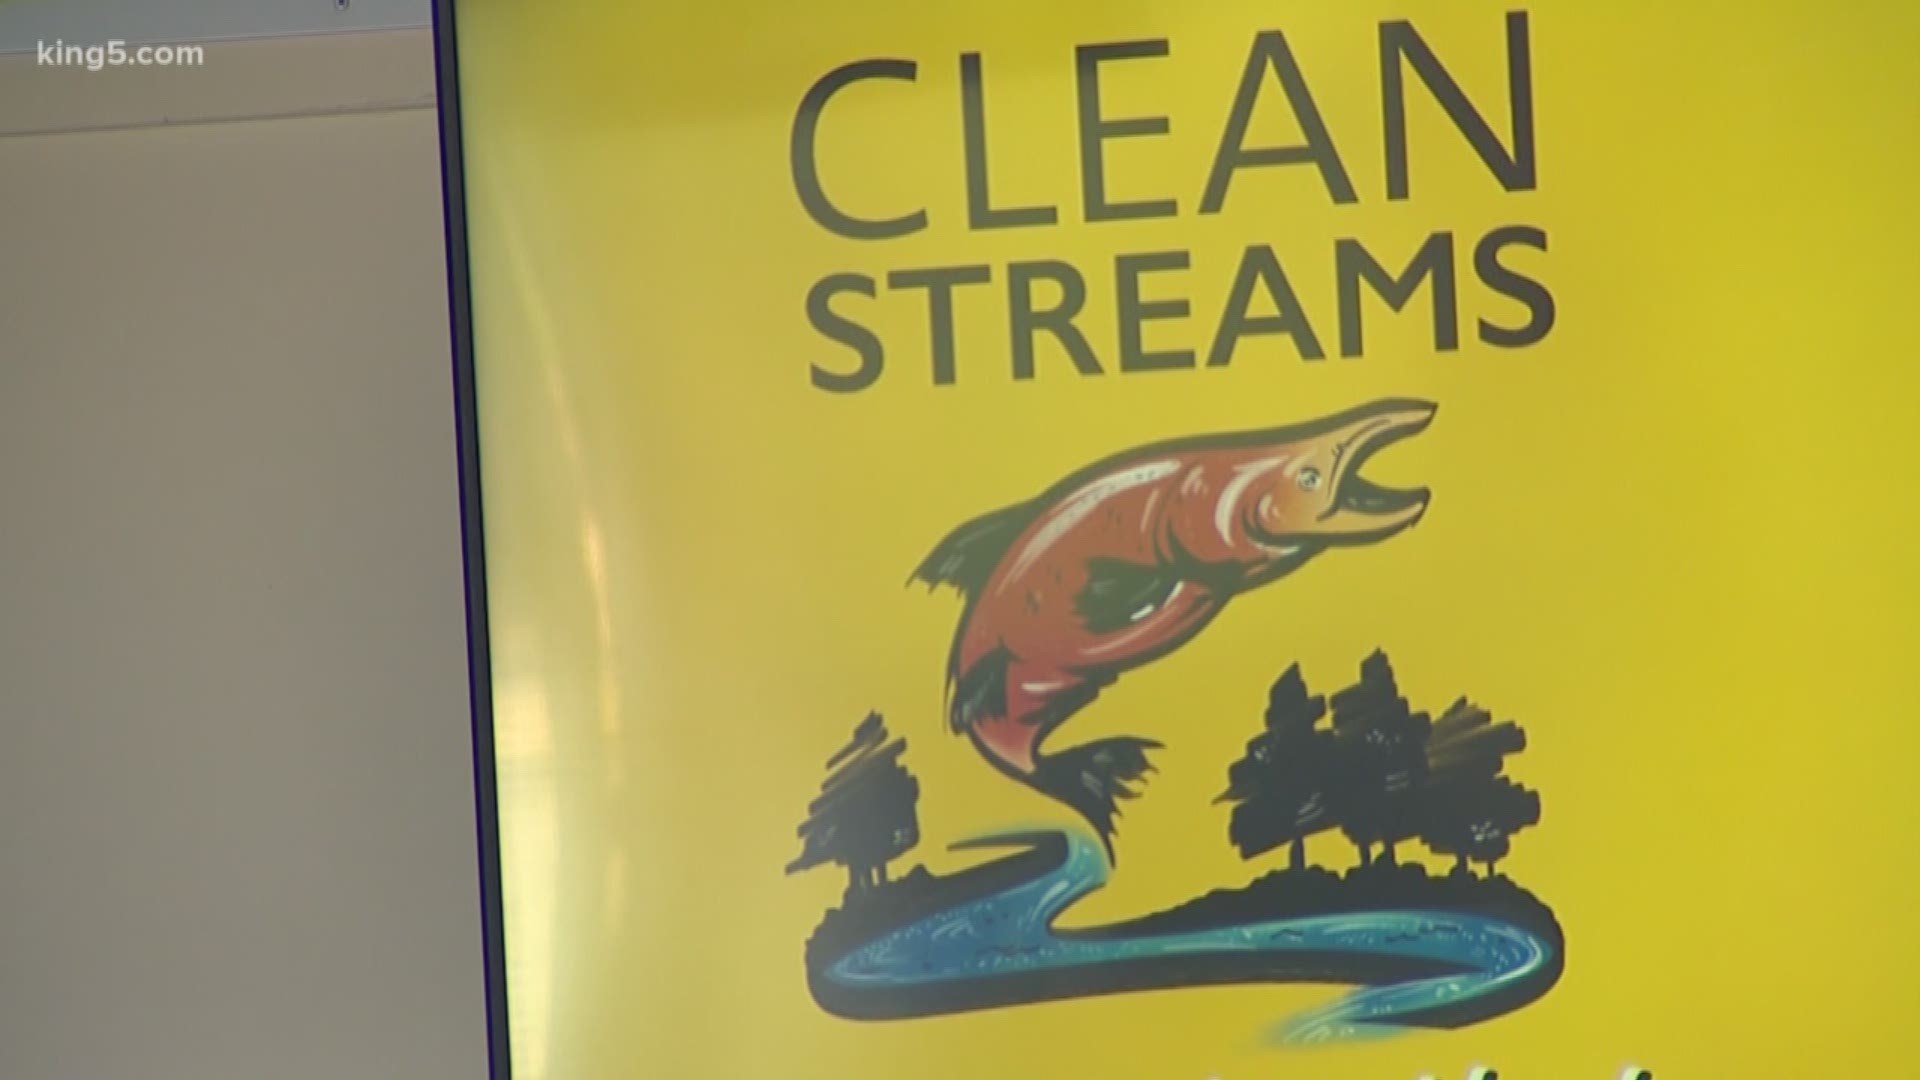 Puget Soundkeeper Alliance launched its Clean Streams Campaign on Tuesday, which aims to create streamside buffers to help keep waterways cool and clean for salmon.